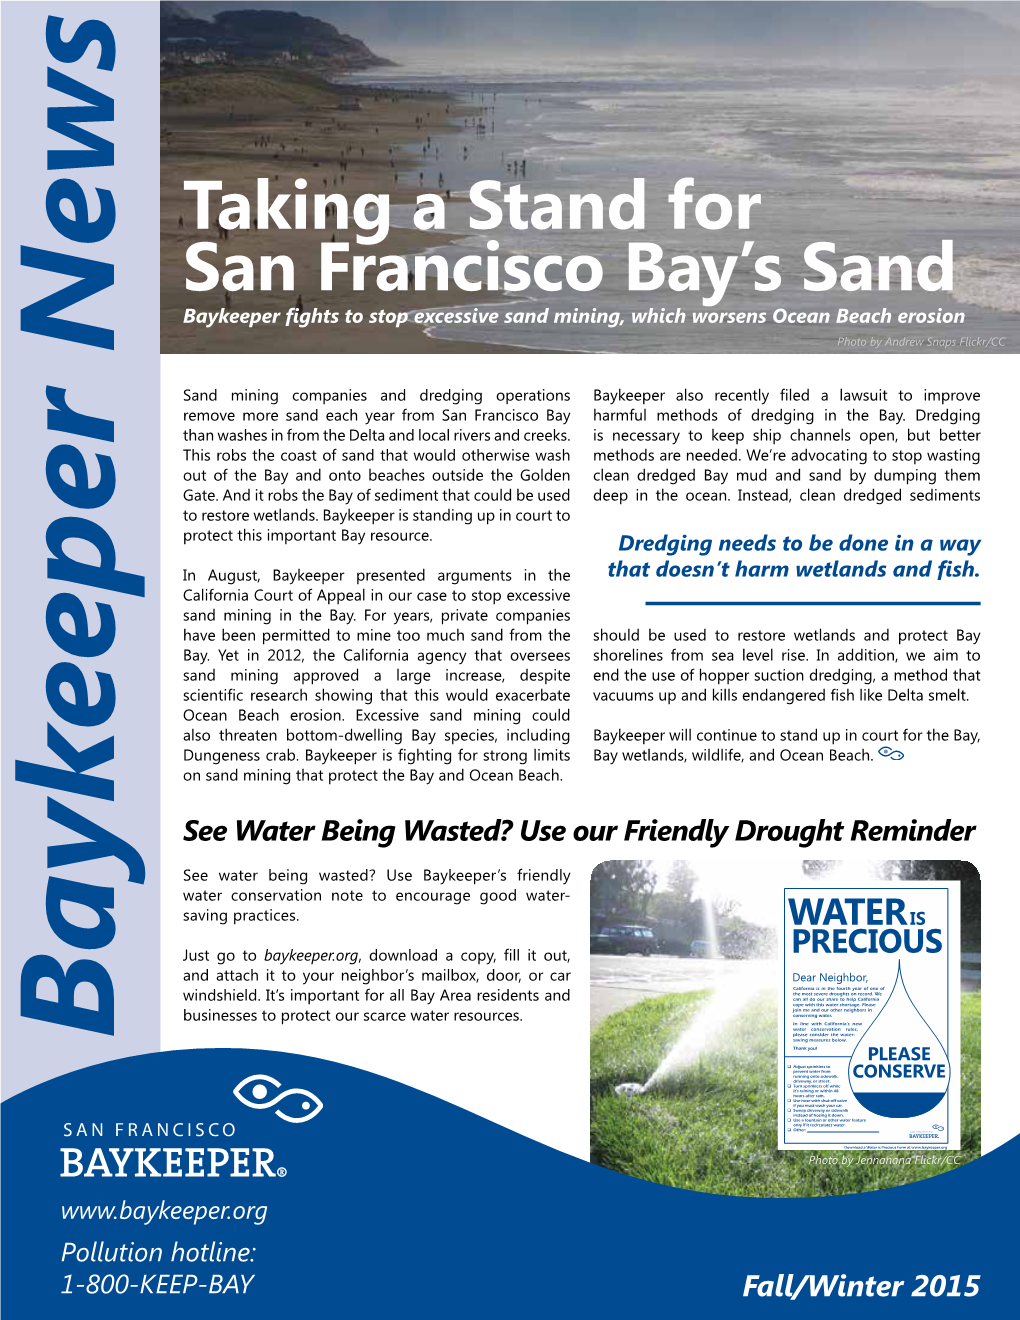 Taking a Stand for San Francisco Bay's